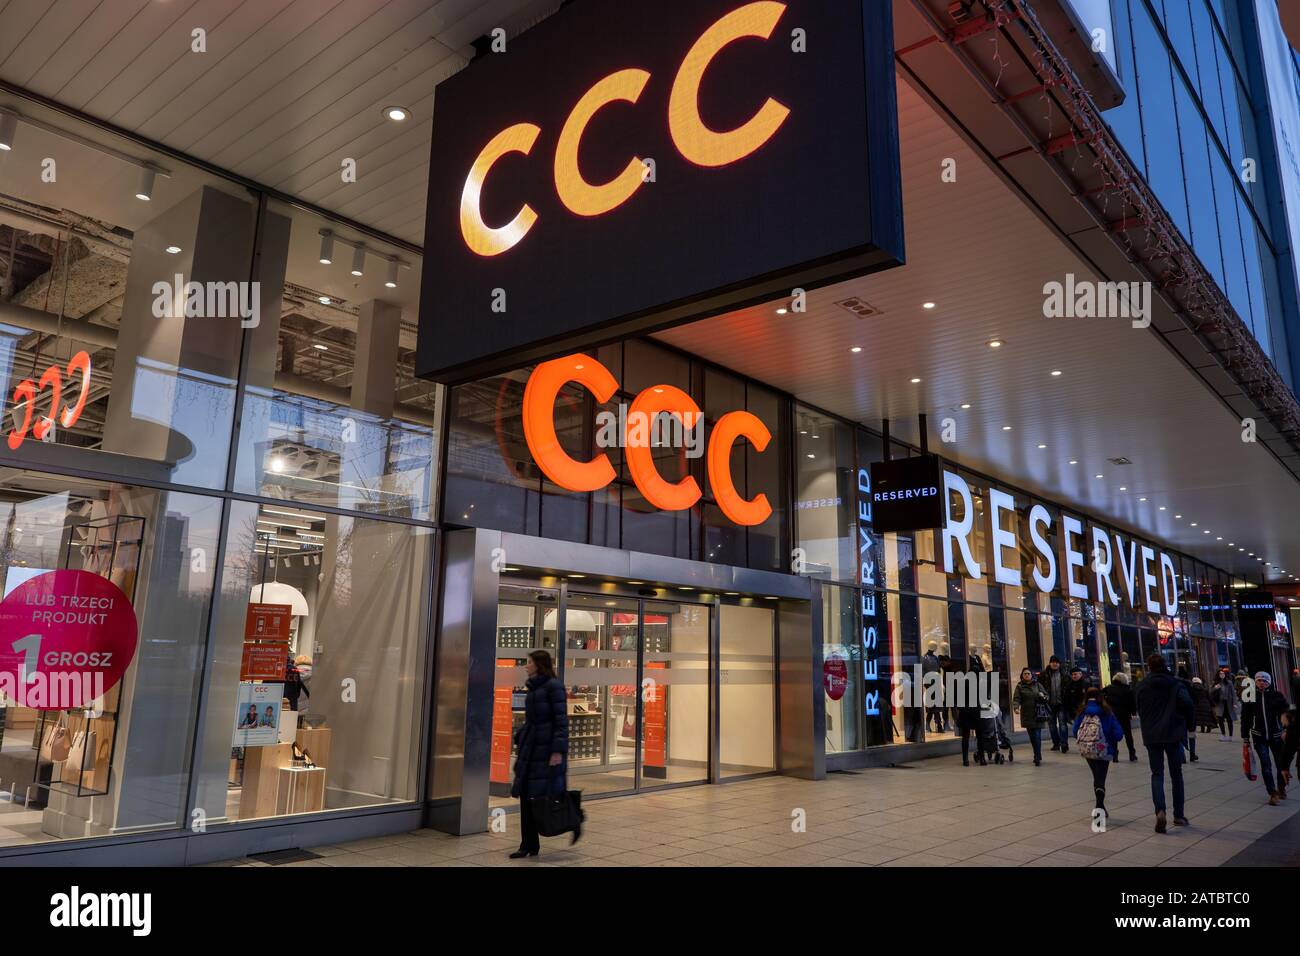 Warsaw, Poland - January 14, 2019: CCC shoes and bags and Reserved clothing store in the city center at night Stock Photo